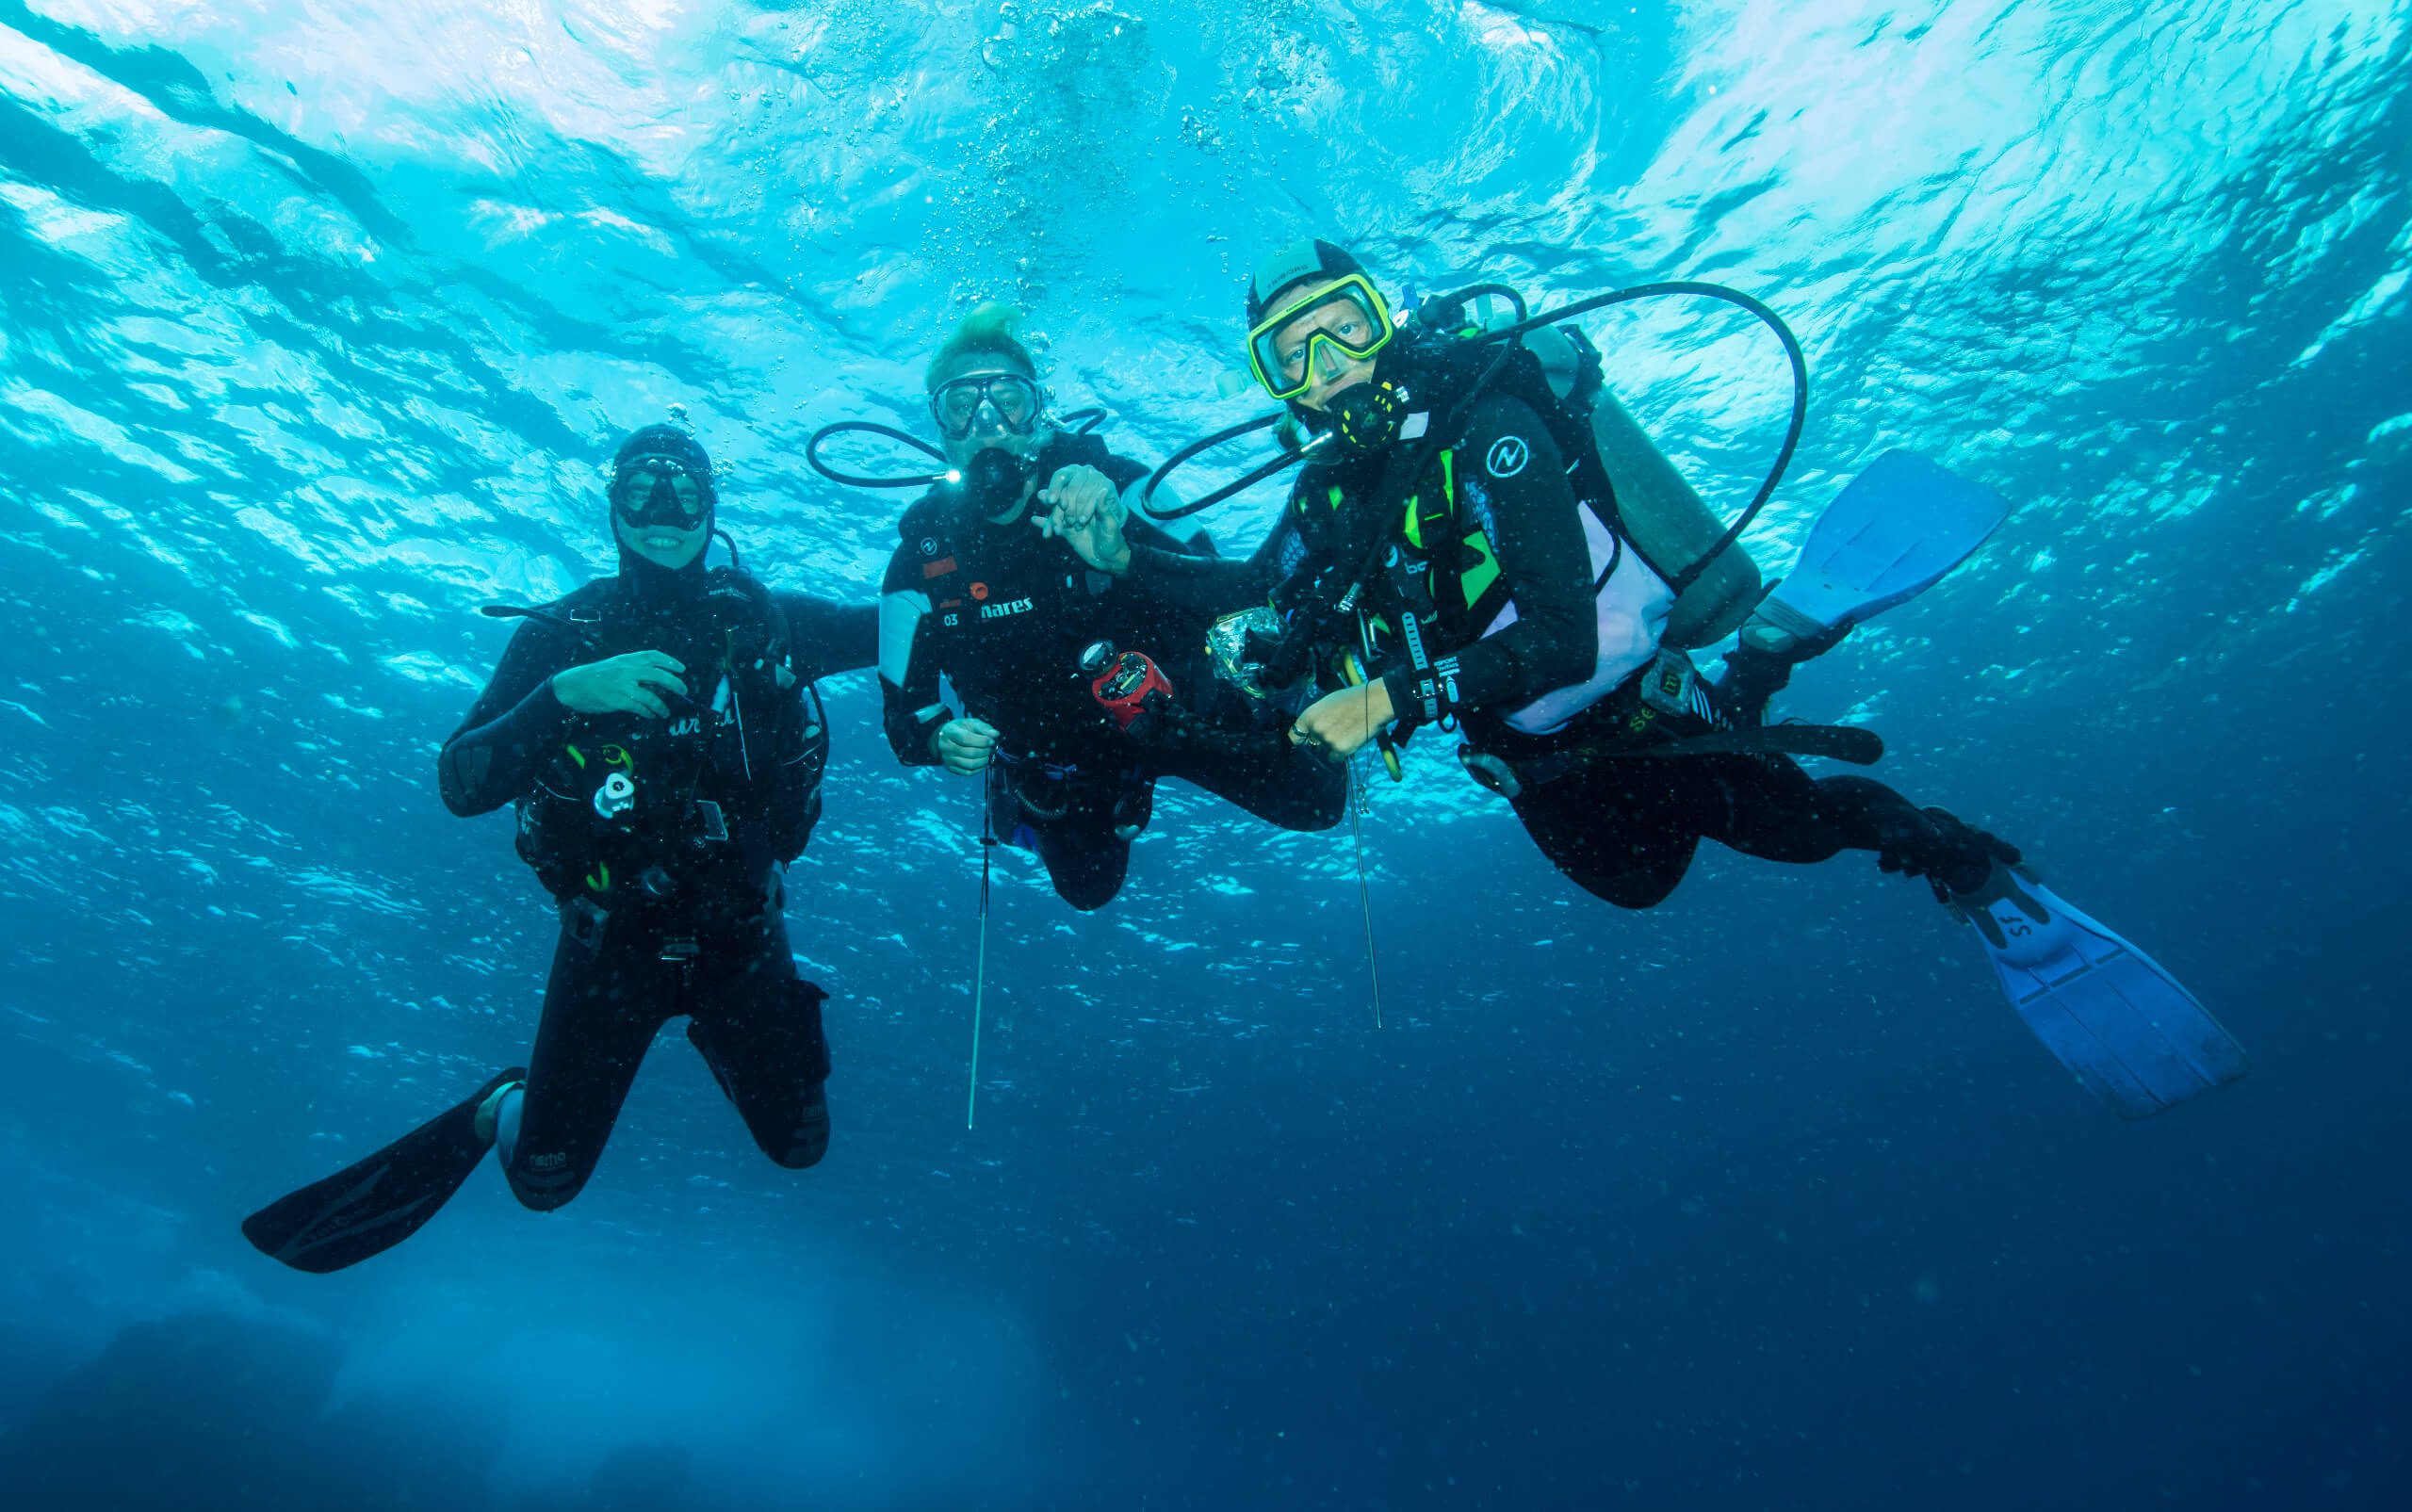 Divers and Diving equipment